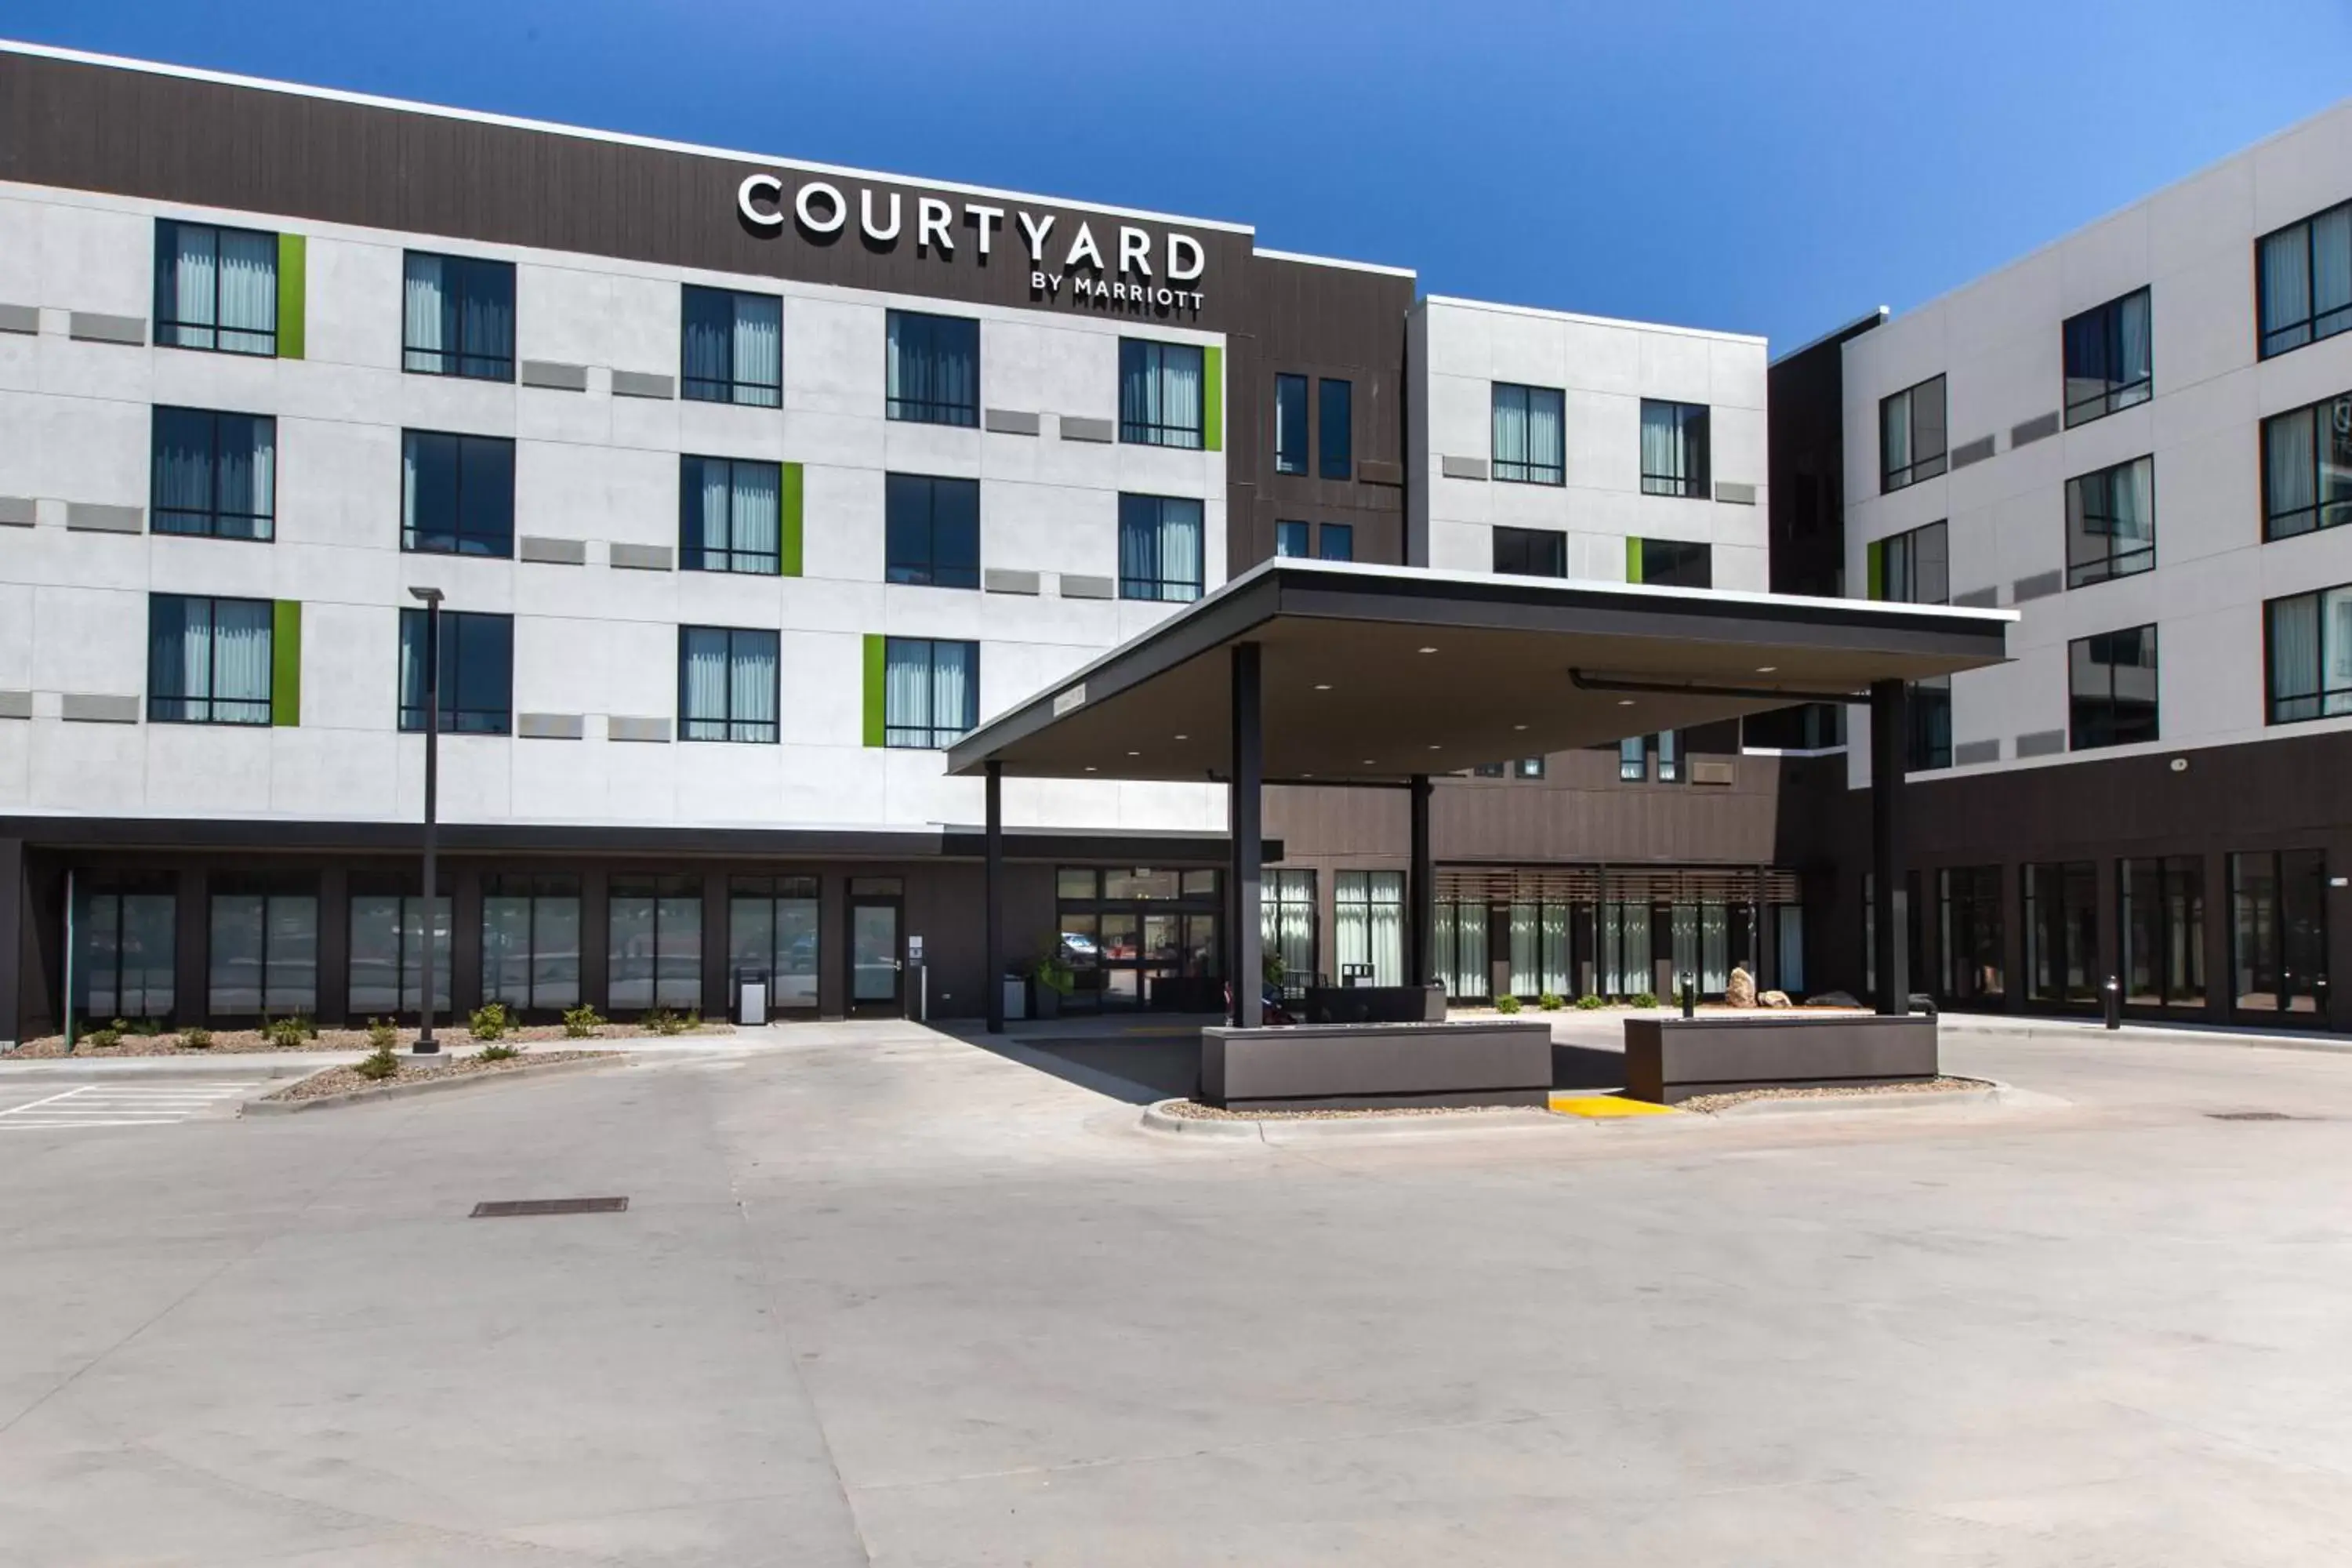 Property Building in Courtyard by Marriott Rapid City